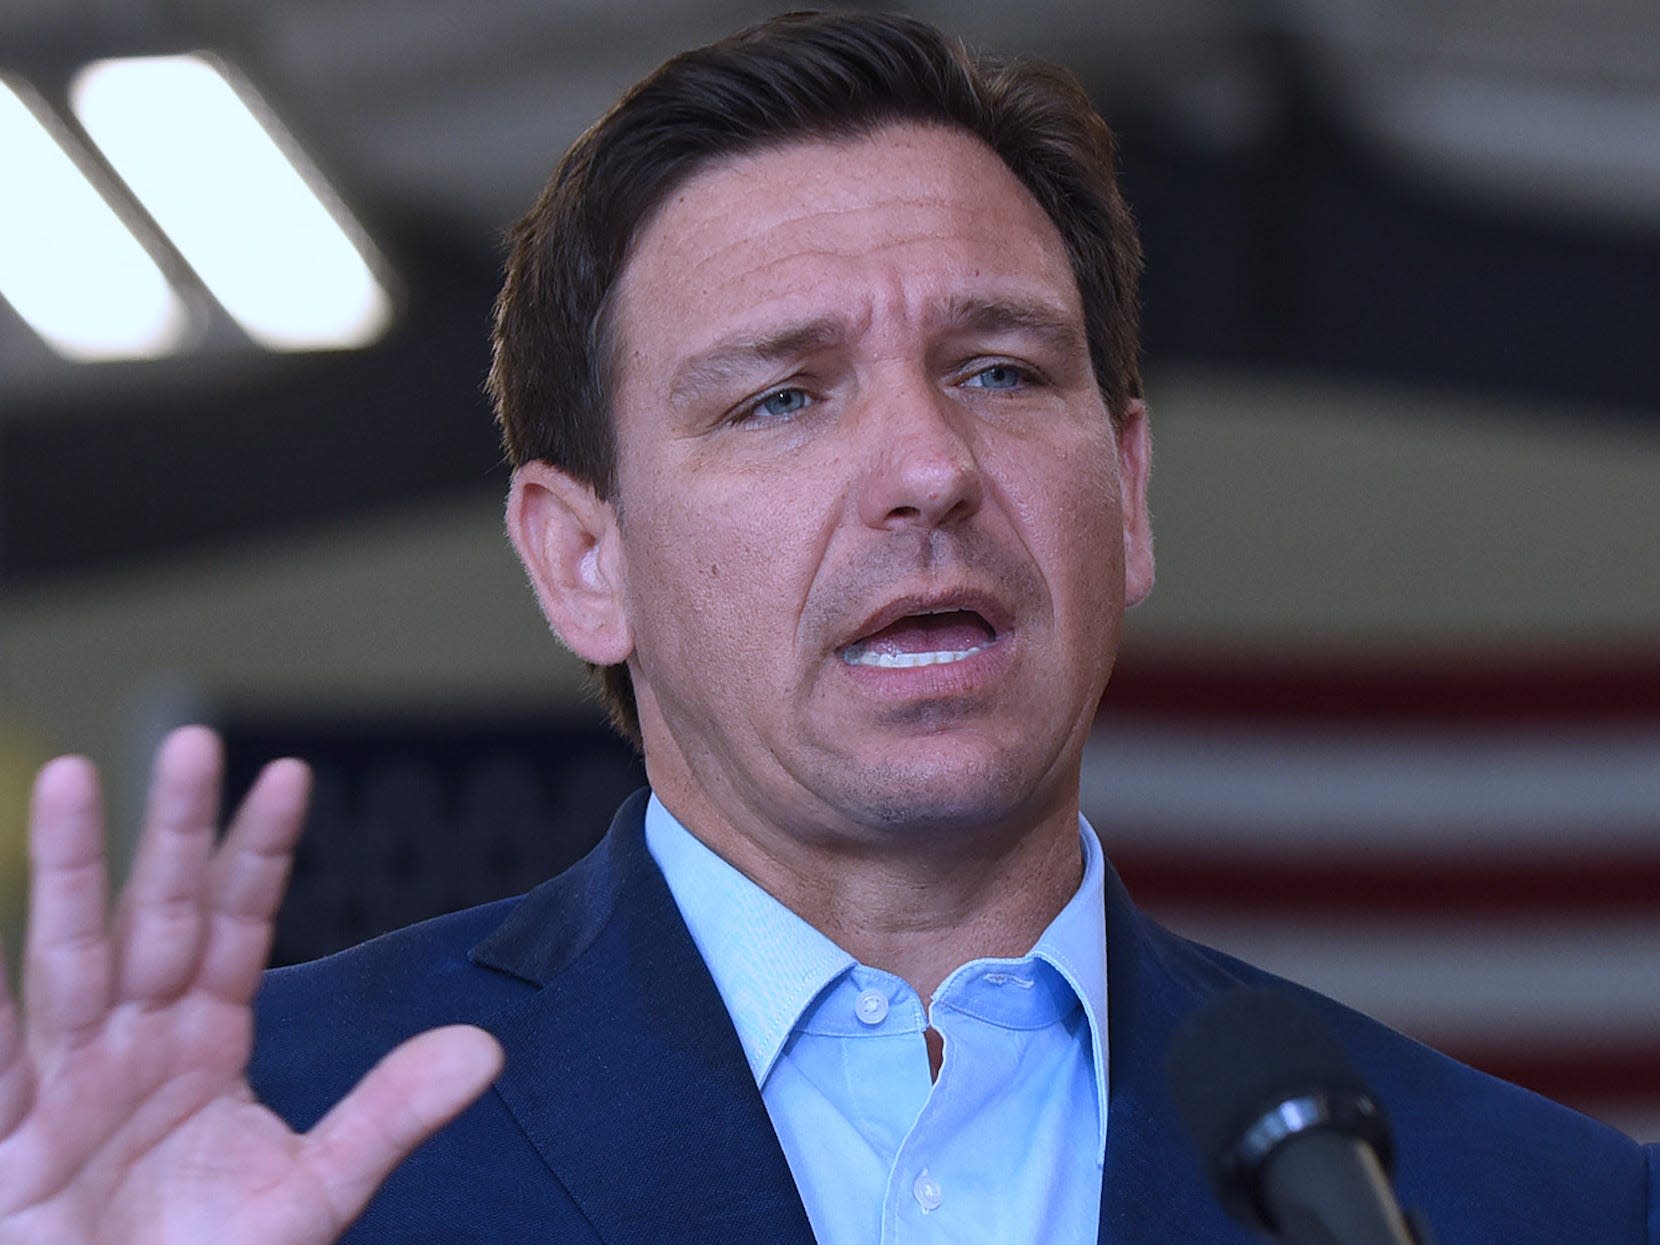 Florida Gov. Ron DeSantis snapped at Biden for criticizing his handling of COVID-19: 'Why don't you do your job?'